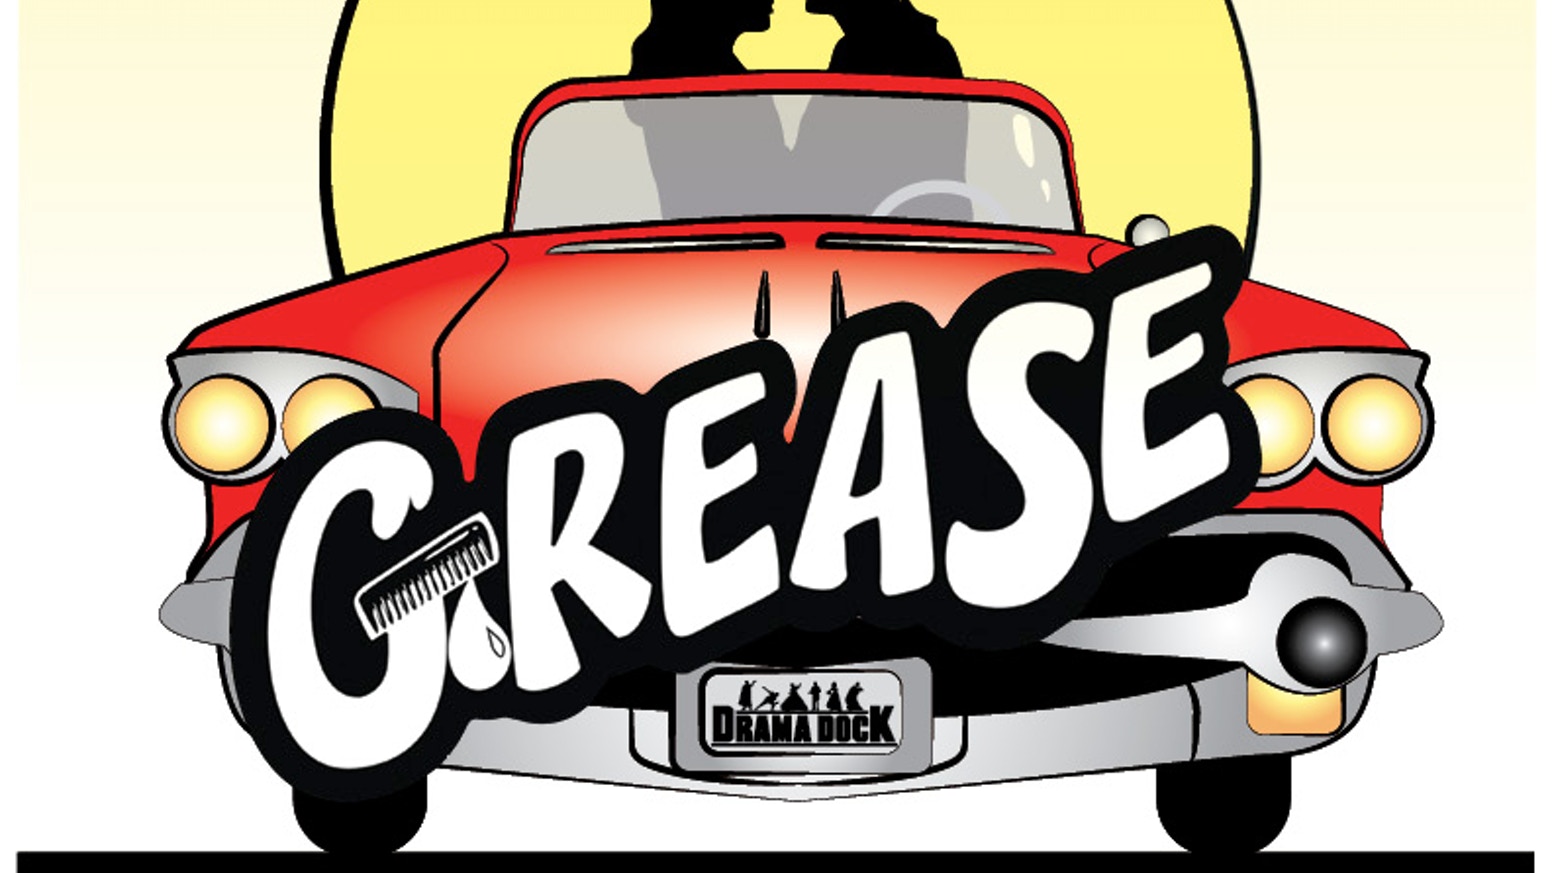 greases - Clip Art Library